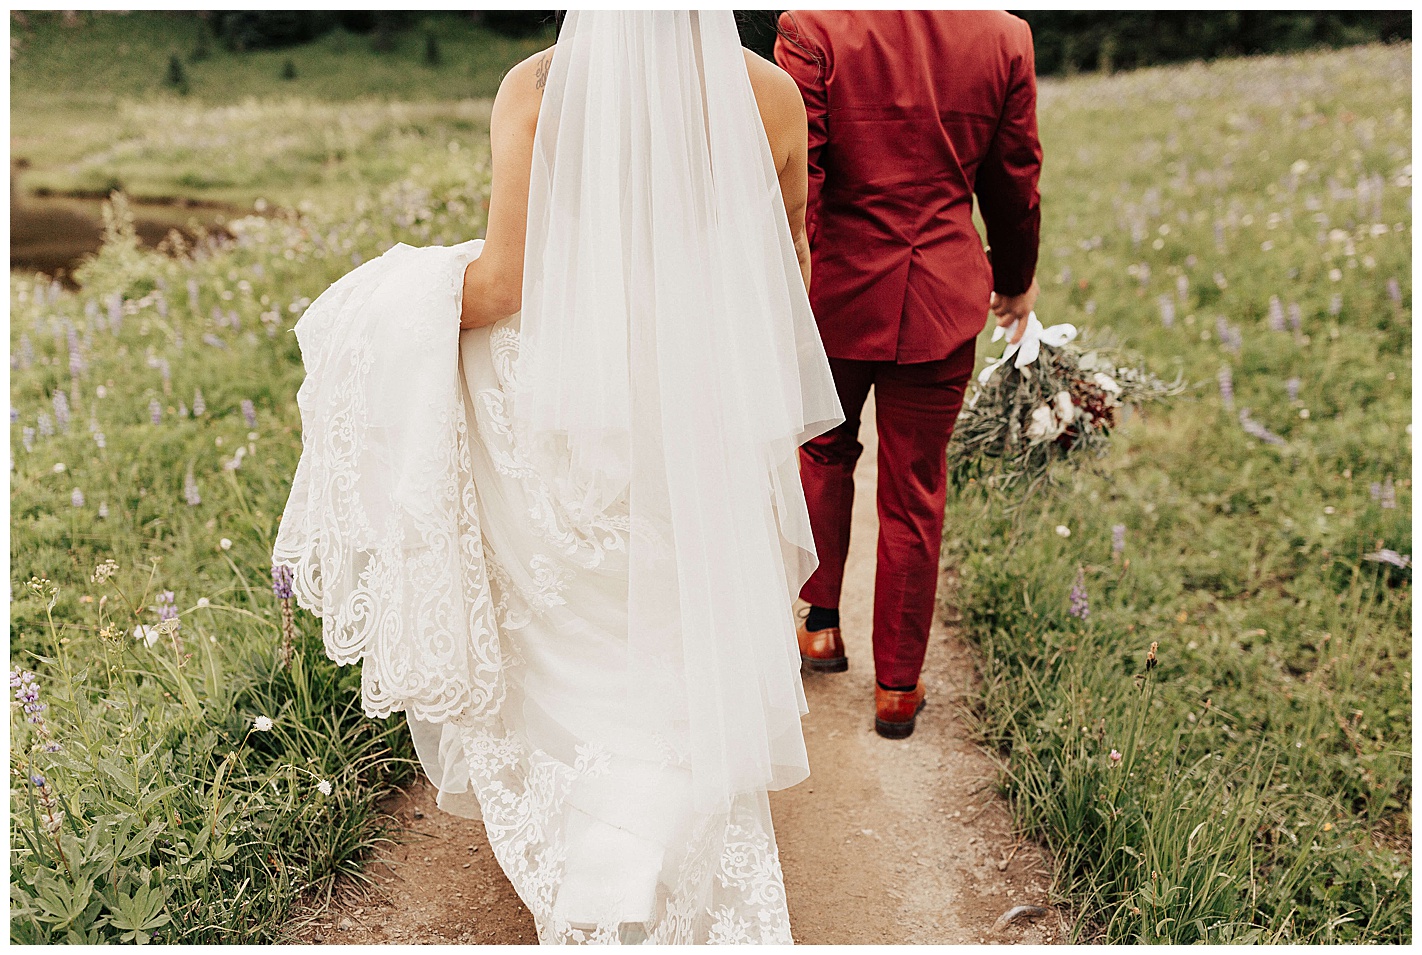 When to Book Your Wedding Photographer